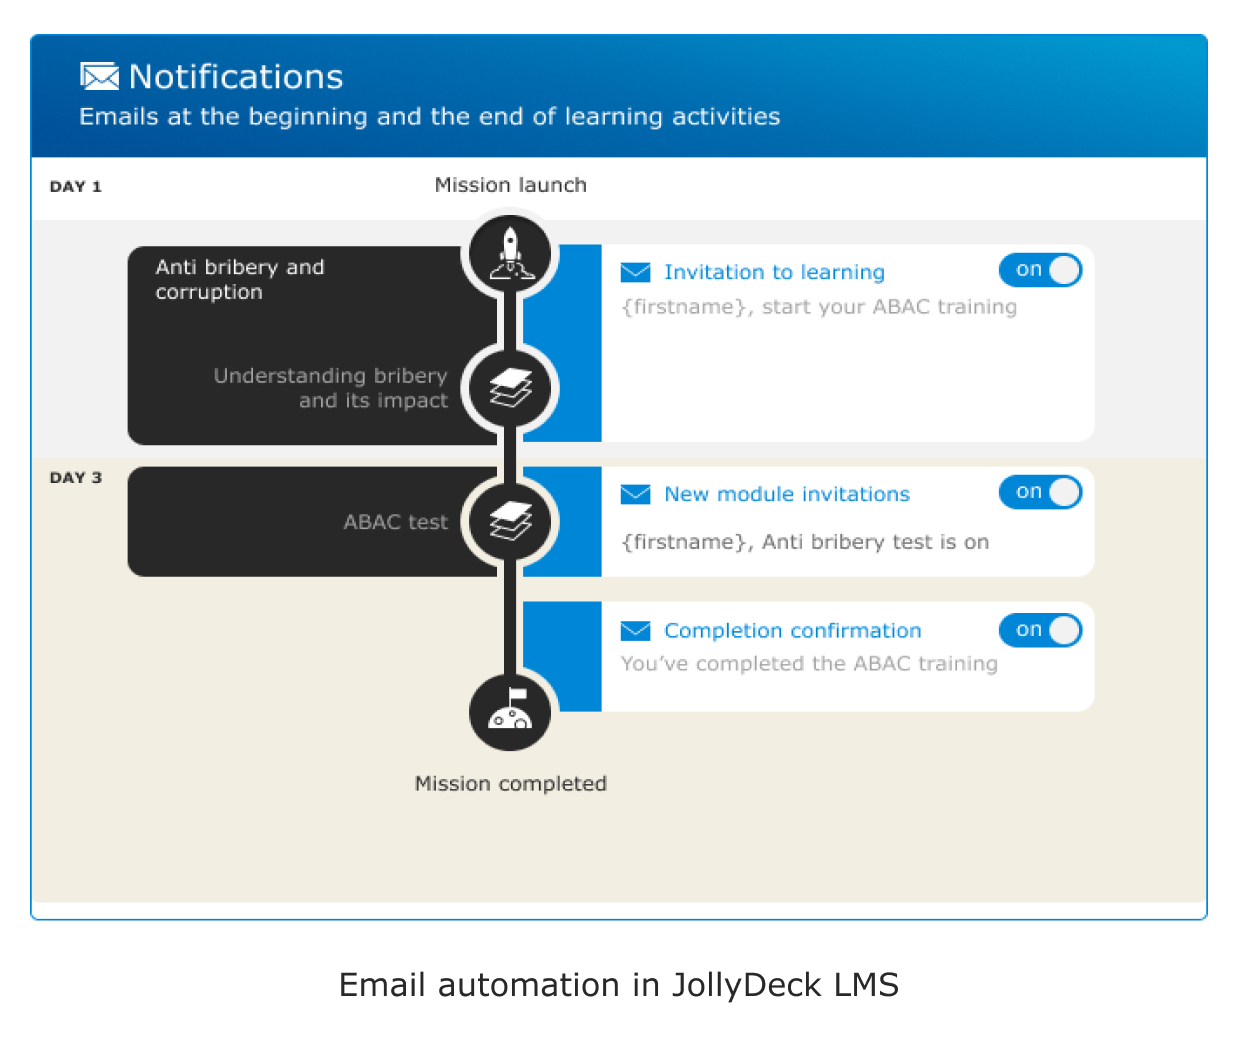 LMS as an email automation tool